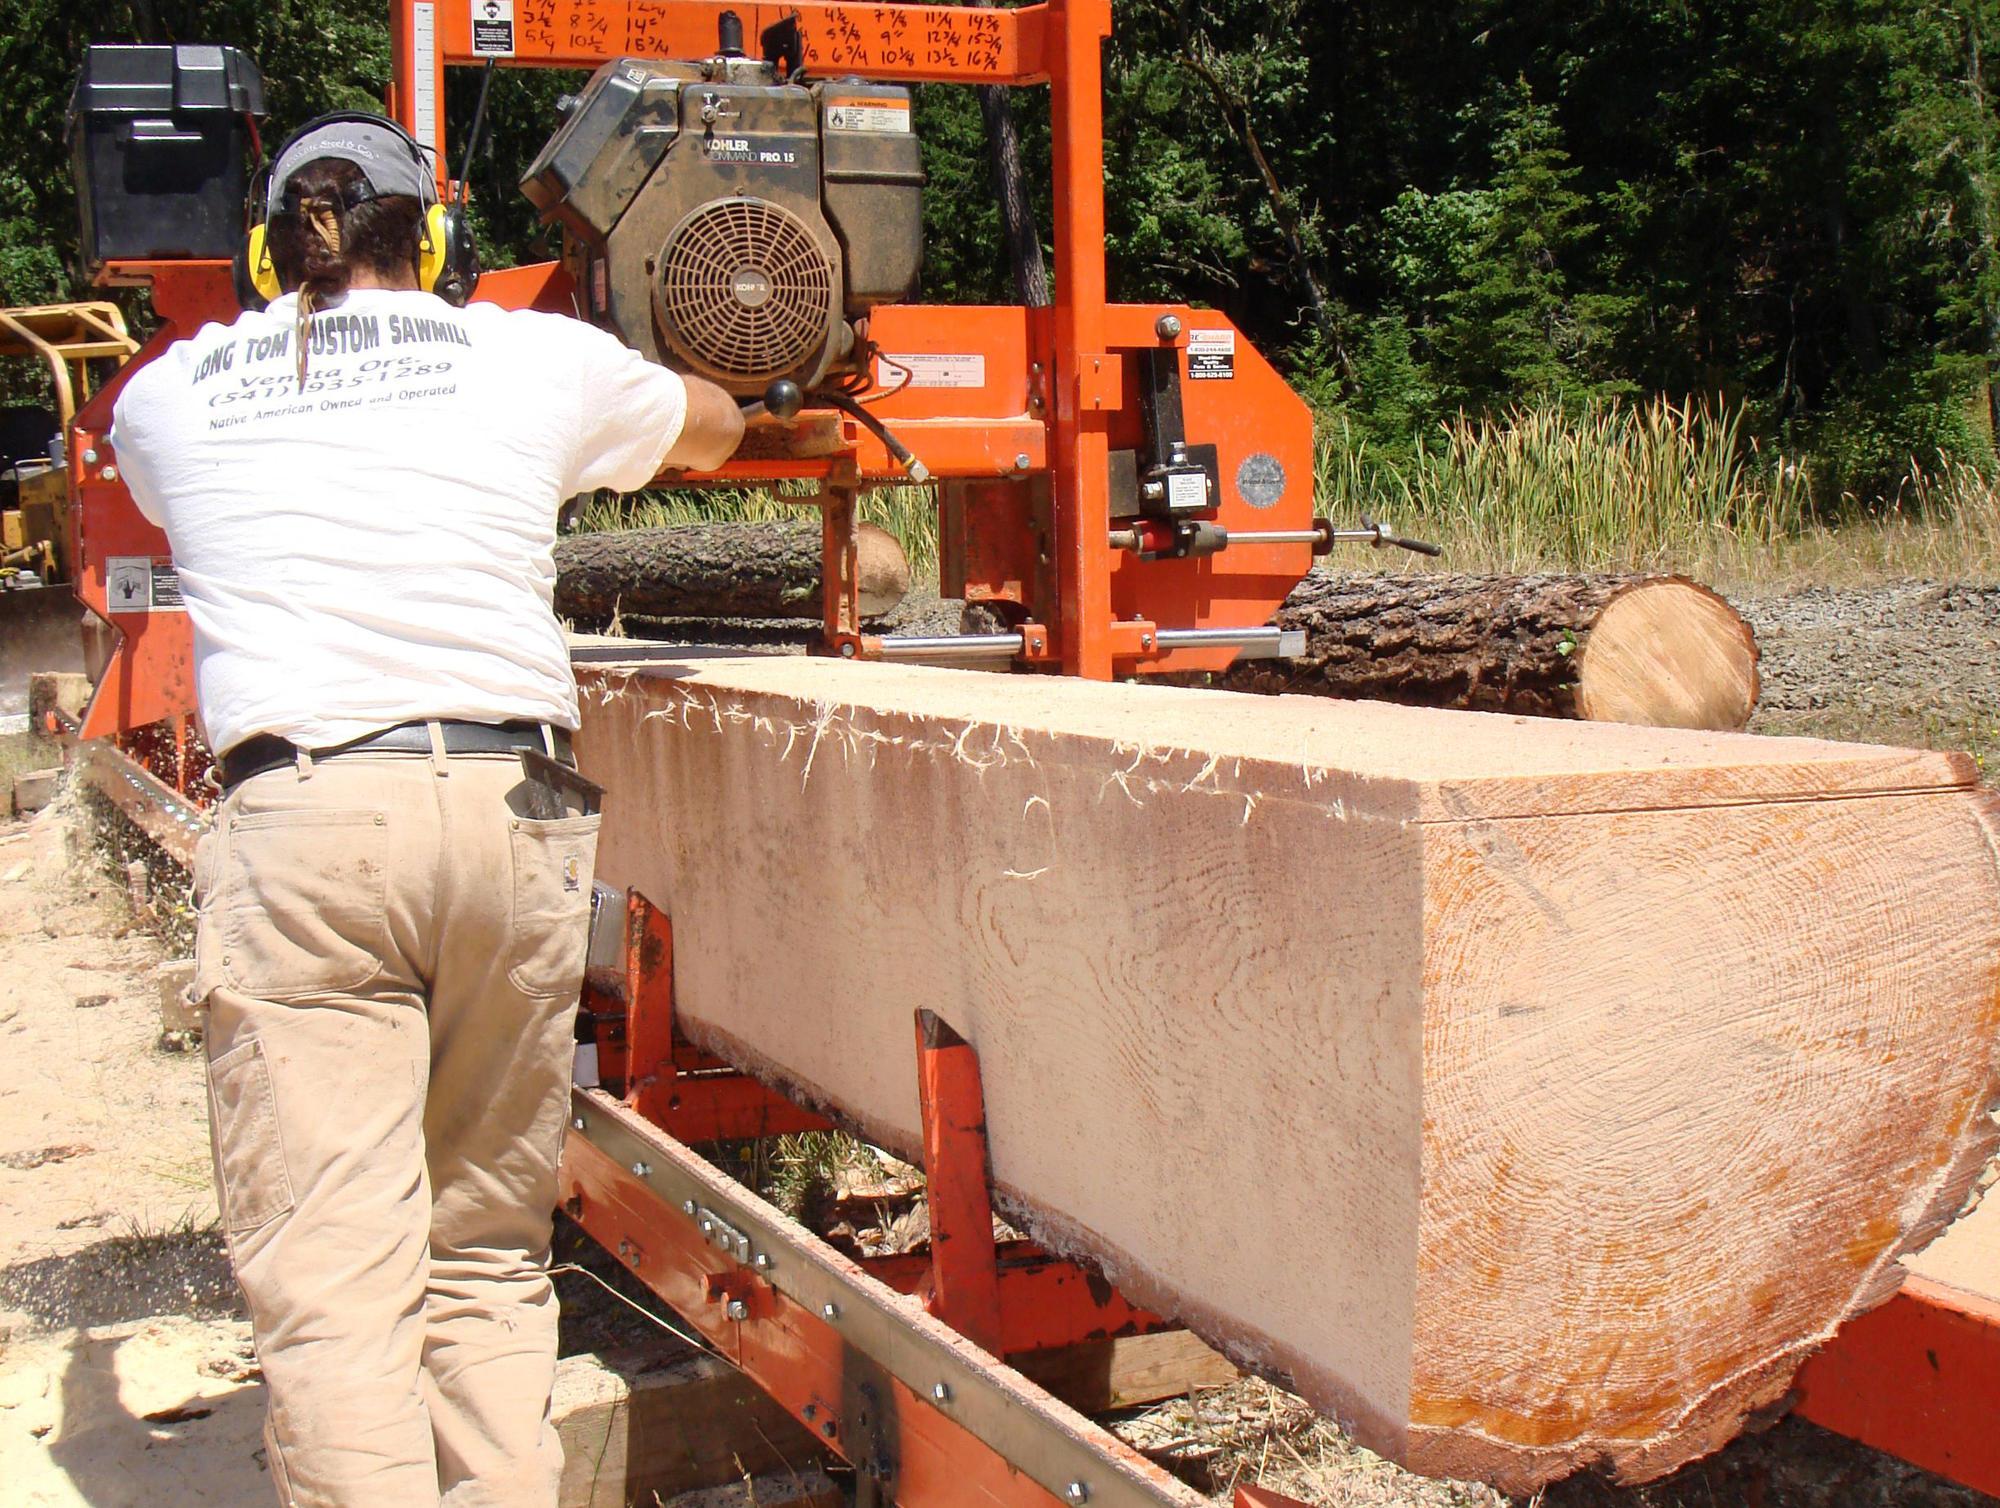 man saws a log using a portable mill on-site